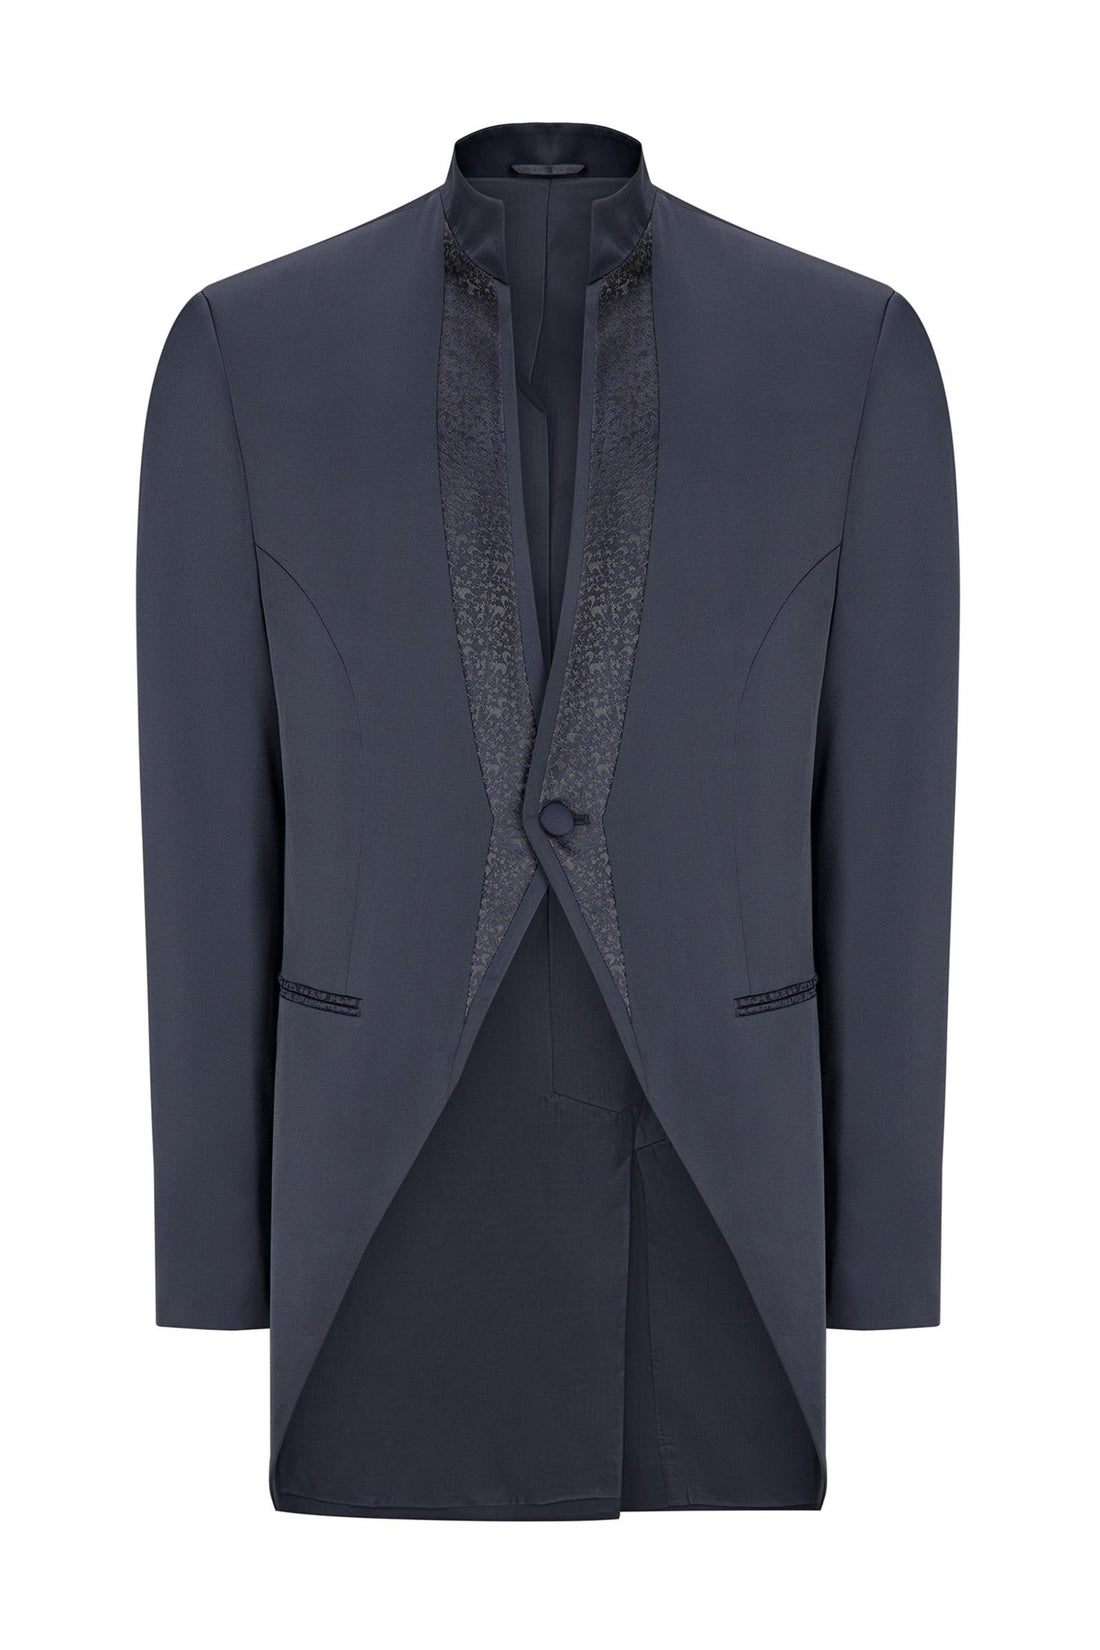 Mao Collar Fitted Trim Tuxedo - Navy - Ron Tomson